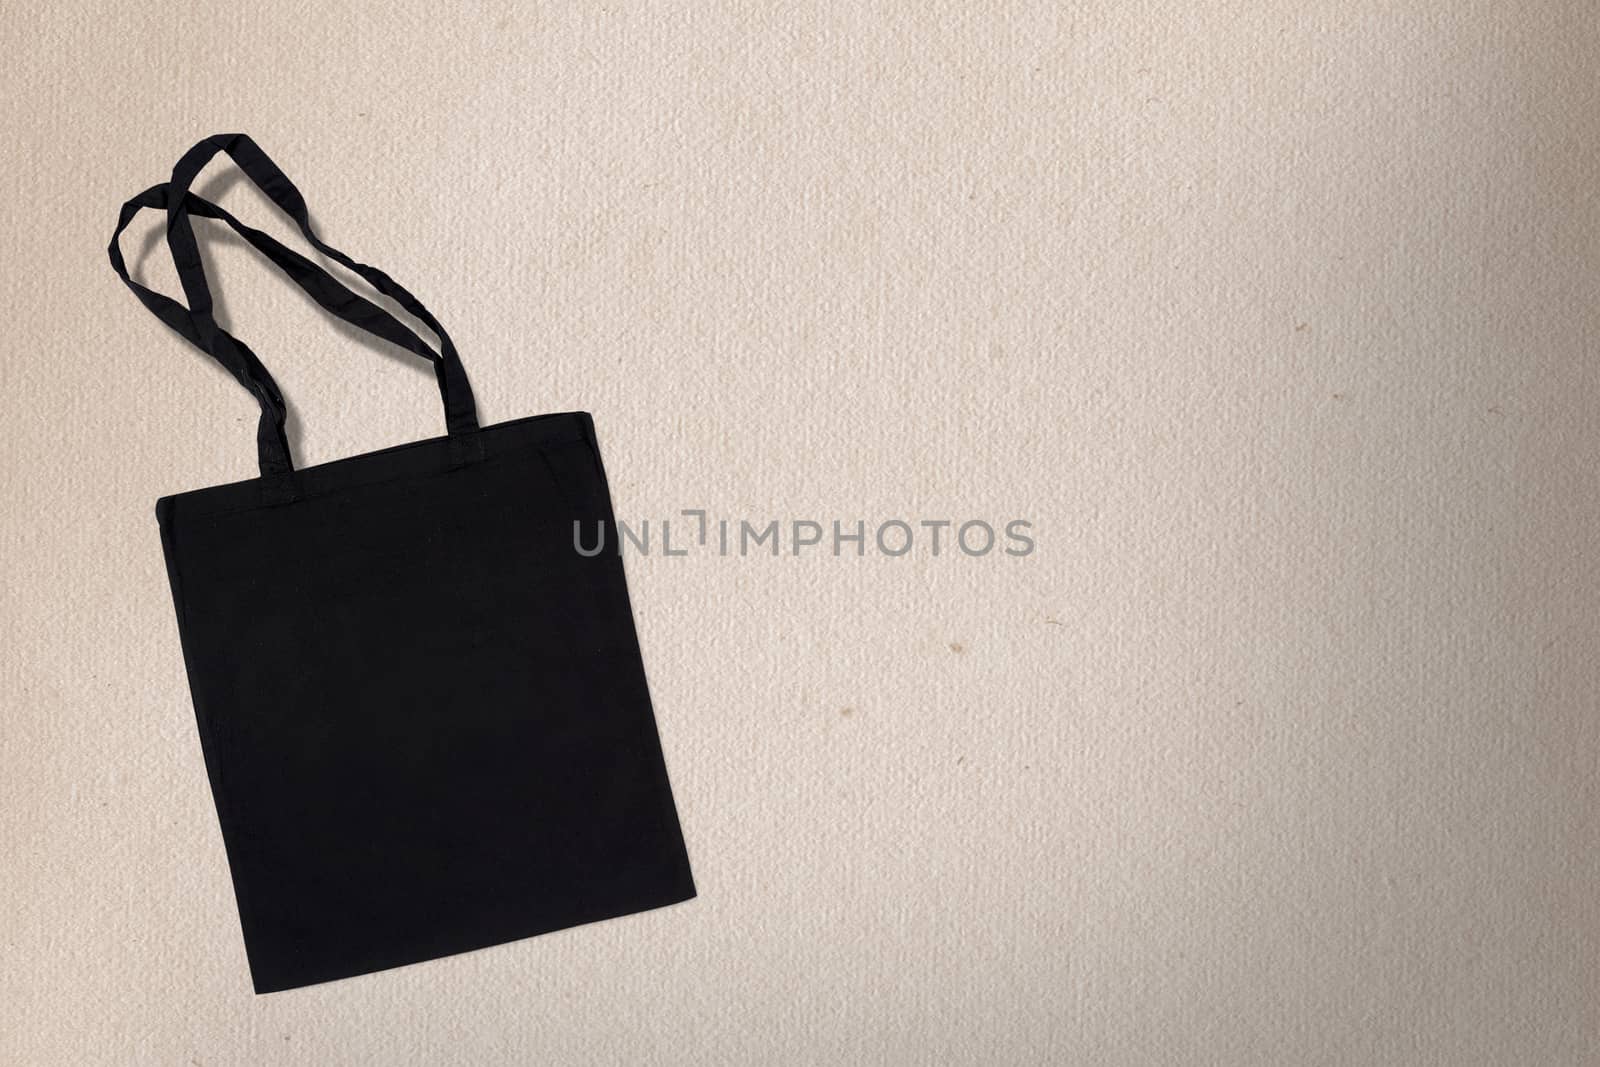 black cotton bag for shopping on a light background